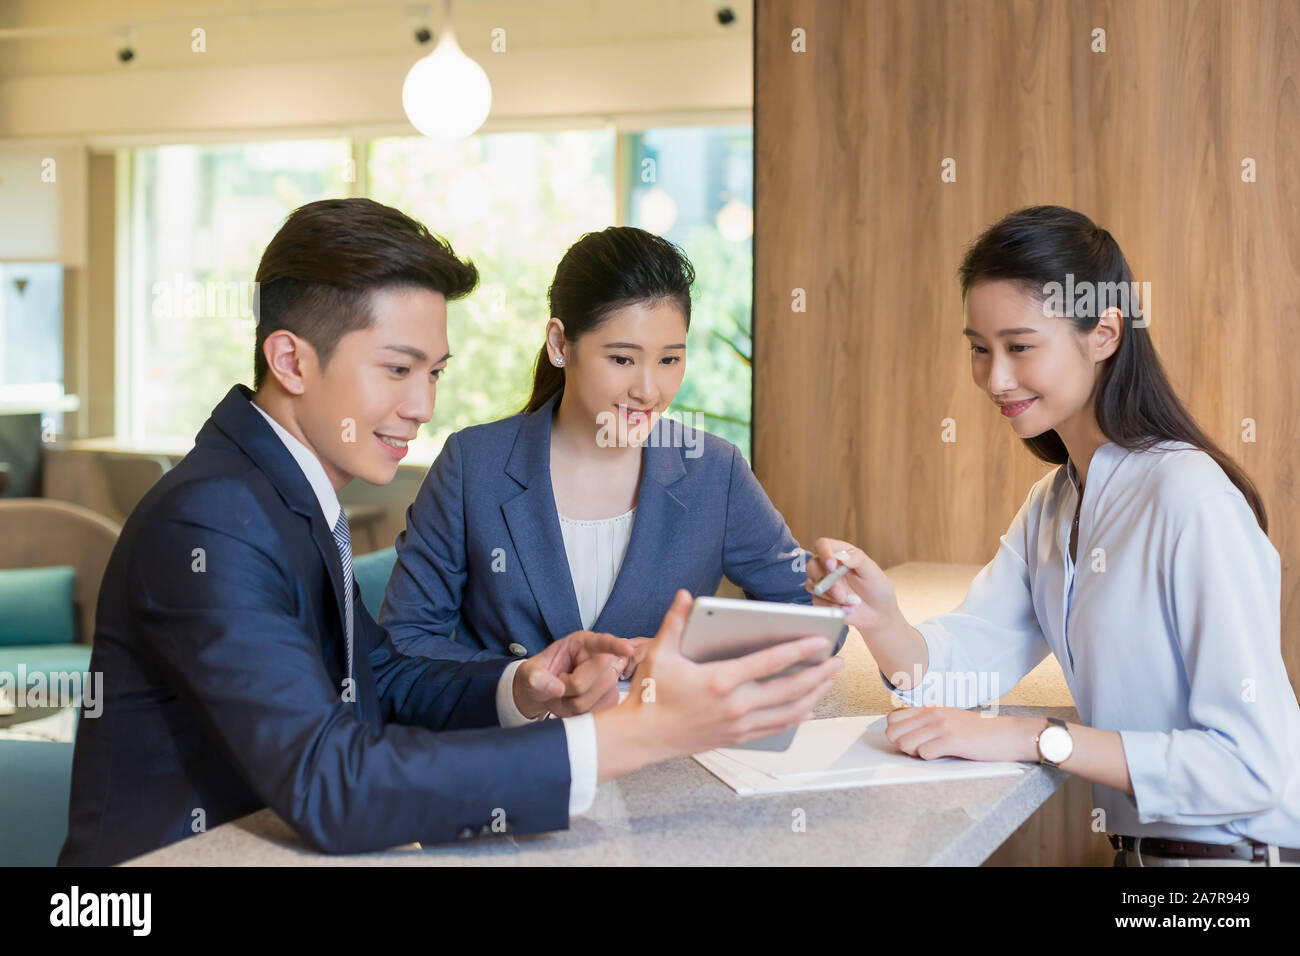 Group of three male and female young smiling businesspeople sitting together in an office and looking at a digital tablet held by one of them Stock Photo